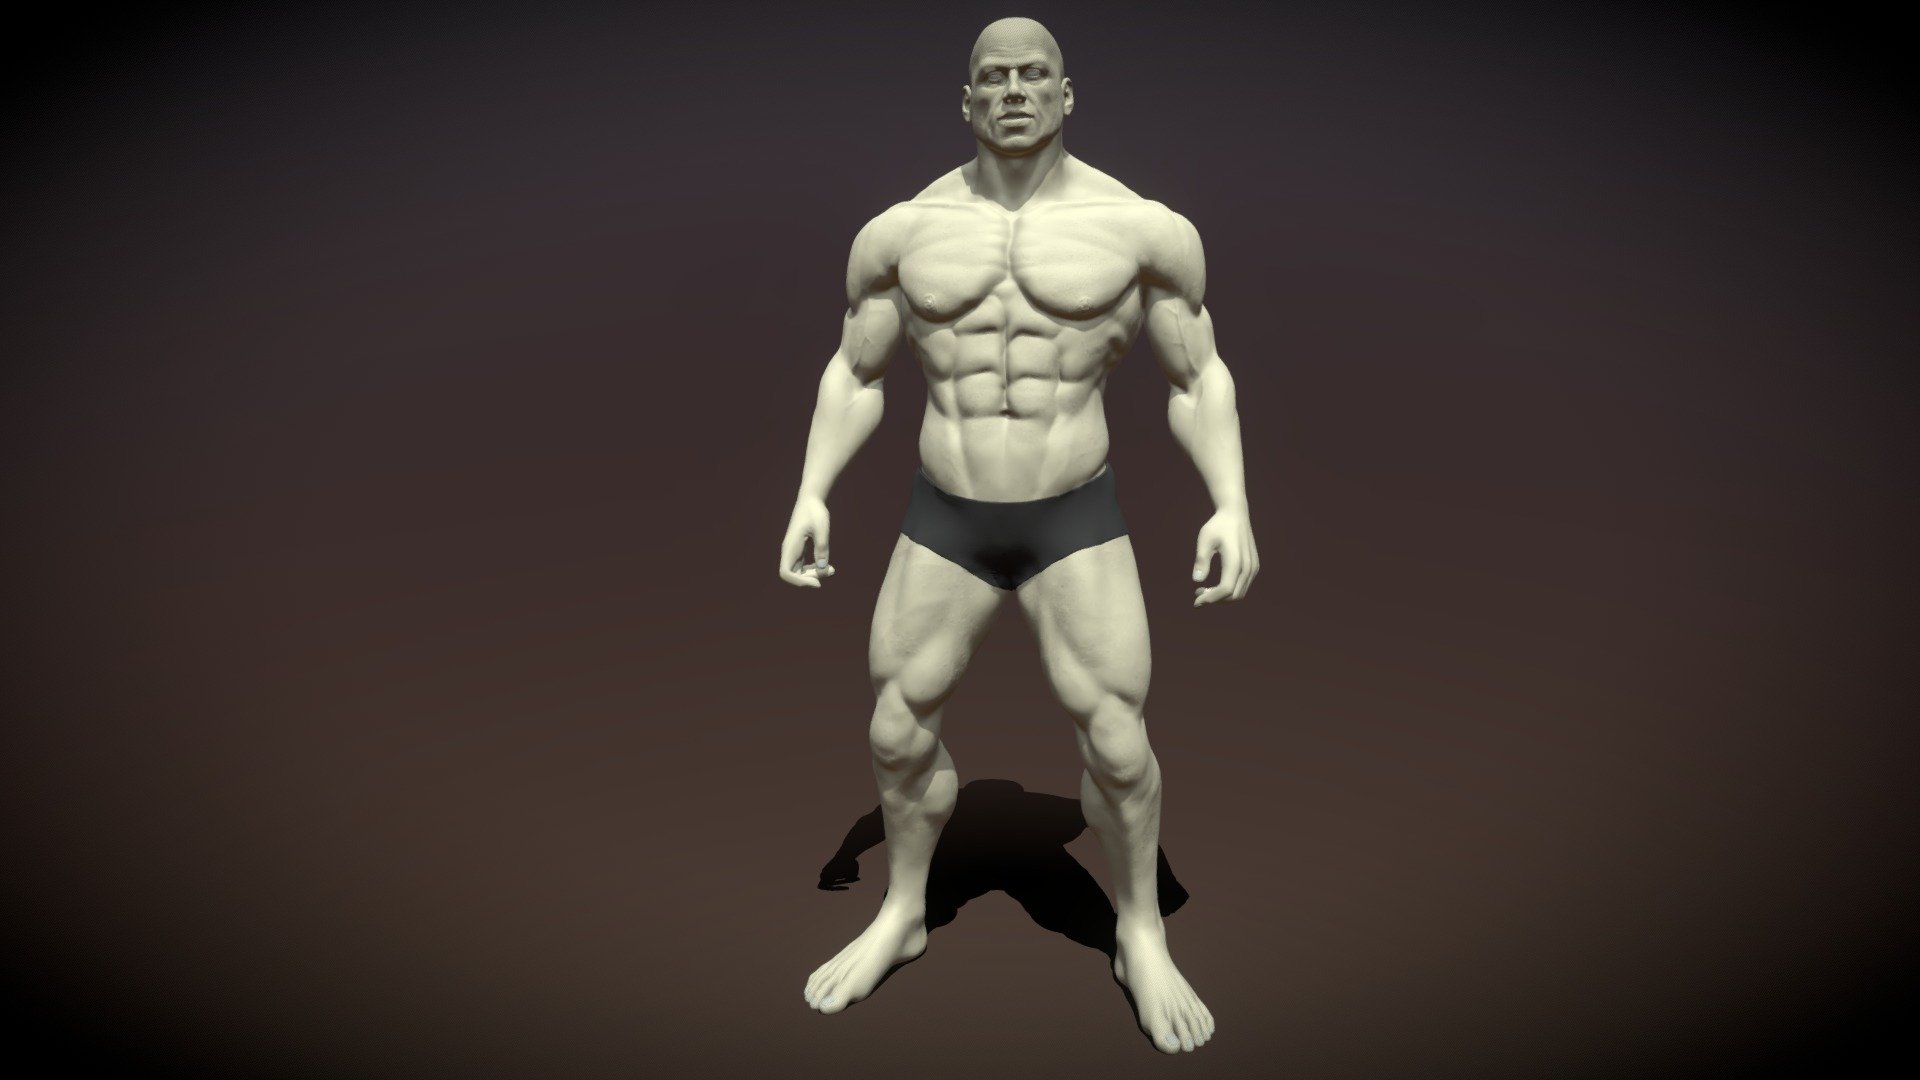 Actually, I sculpted this body consisting of 16 millions polygons. But I had to decimate to upload it here. 
I've prepared retopologized and textured version. I hope I'll put that version here soon 3d model